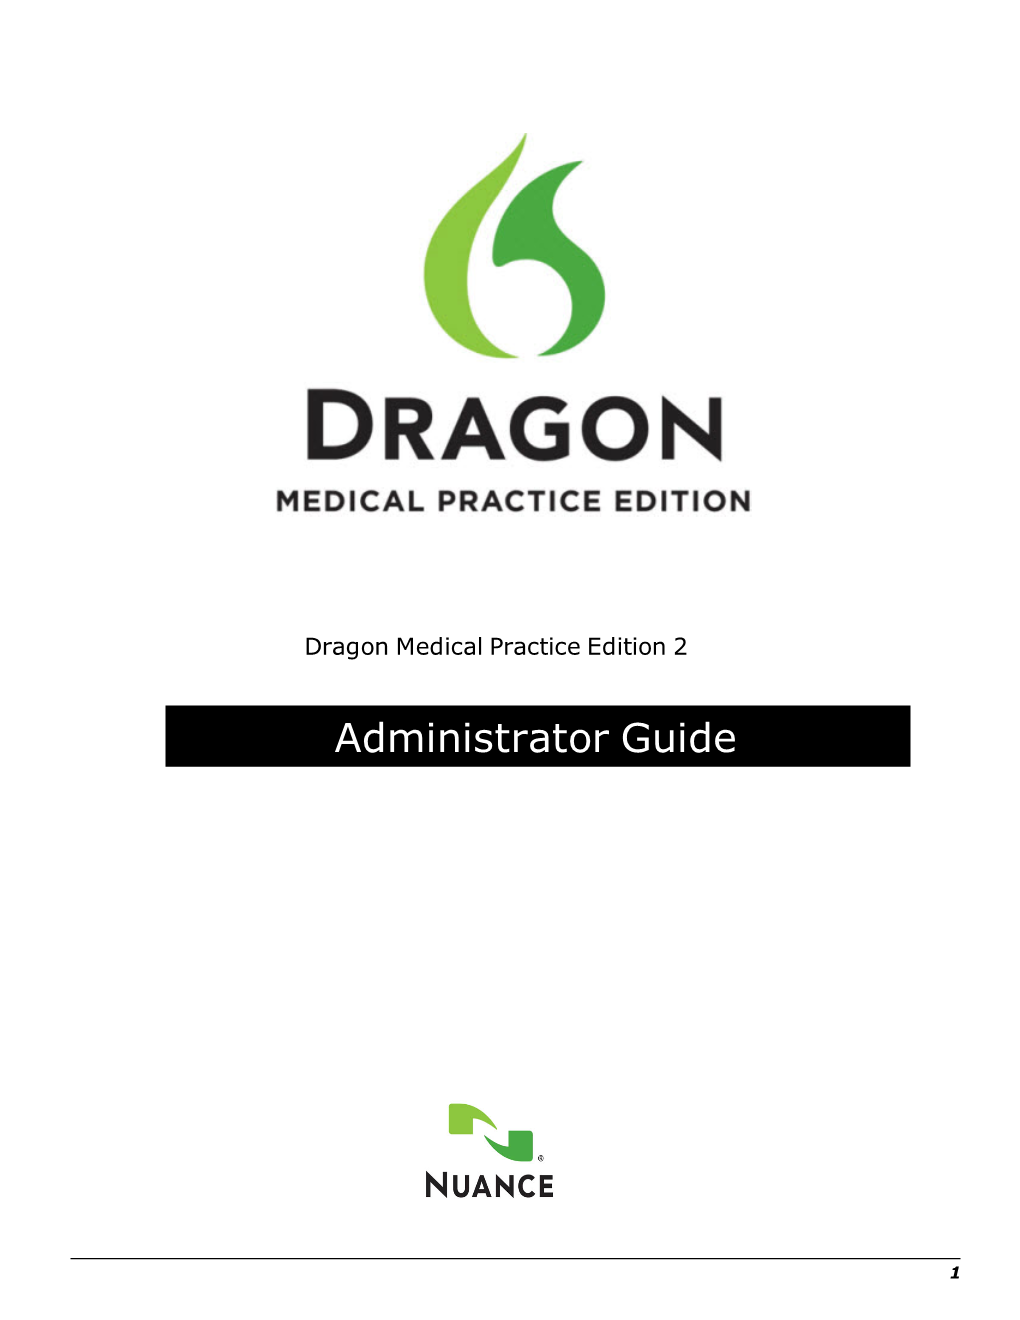 Administrator Guide, Dragon Medical Practice Edition Version 2.0, L-3659